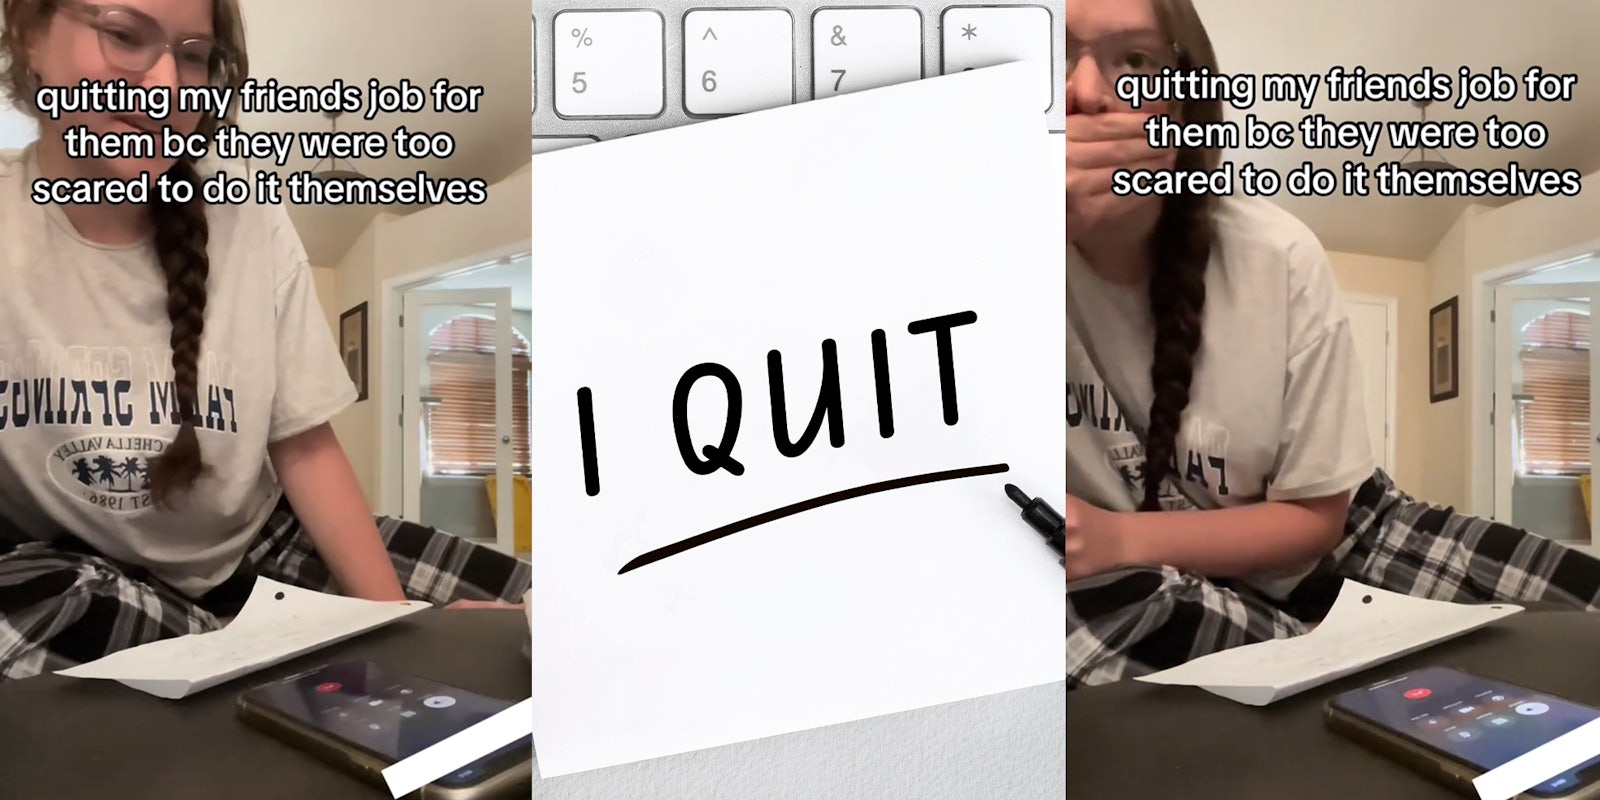 Worker gets her friend to quit her job for her